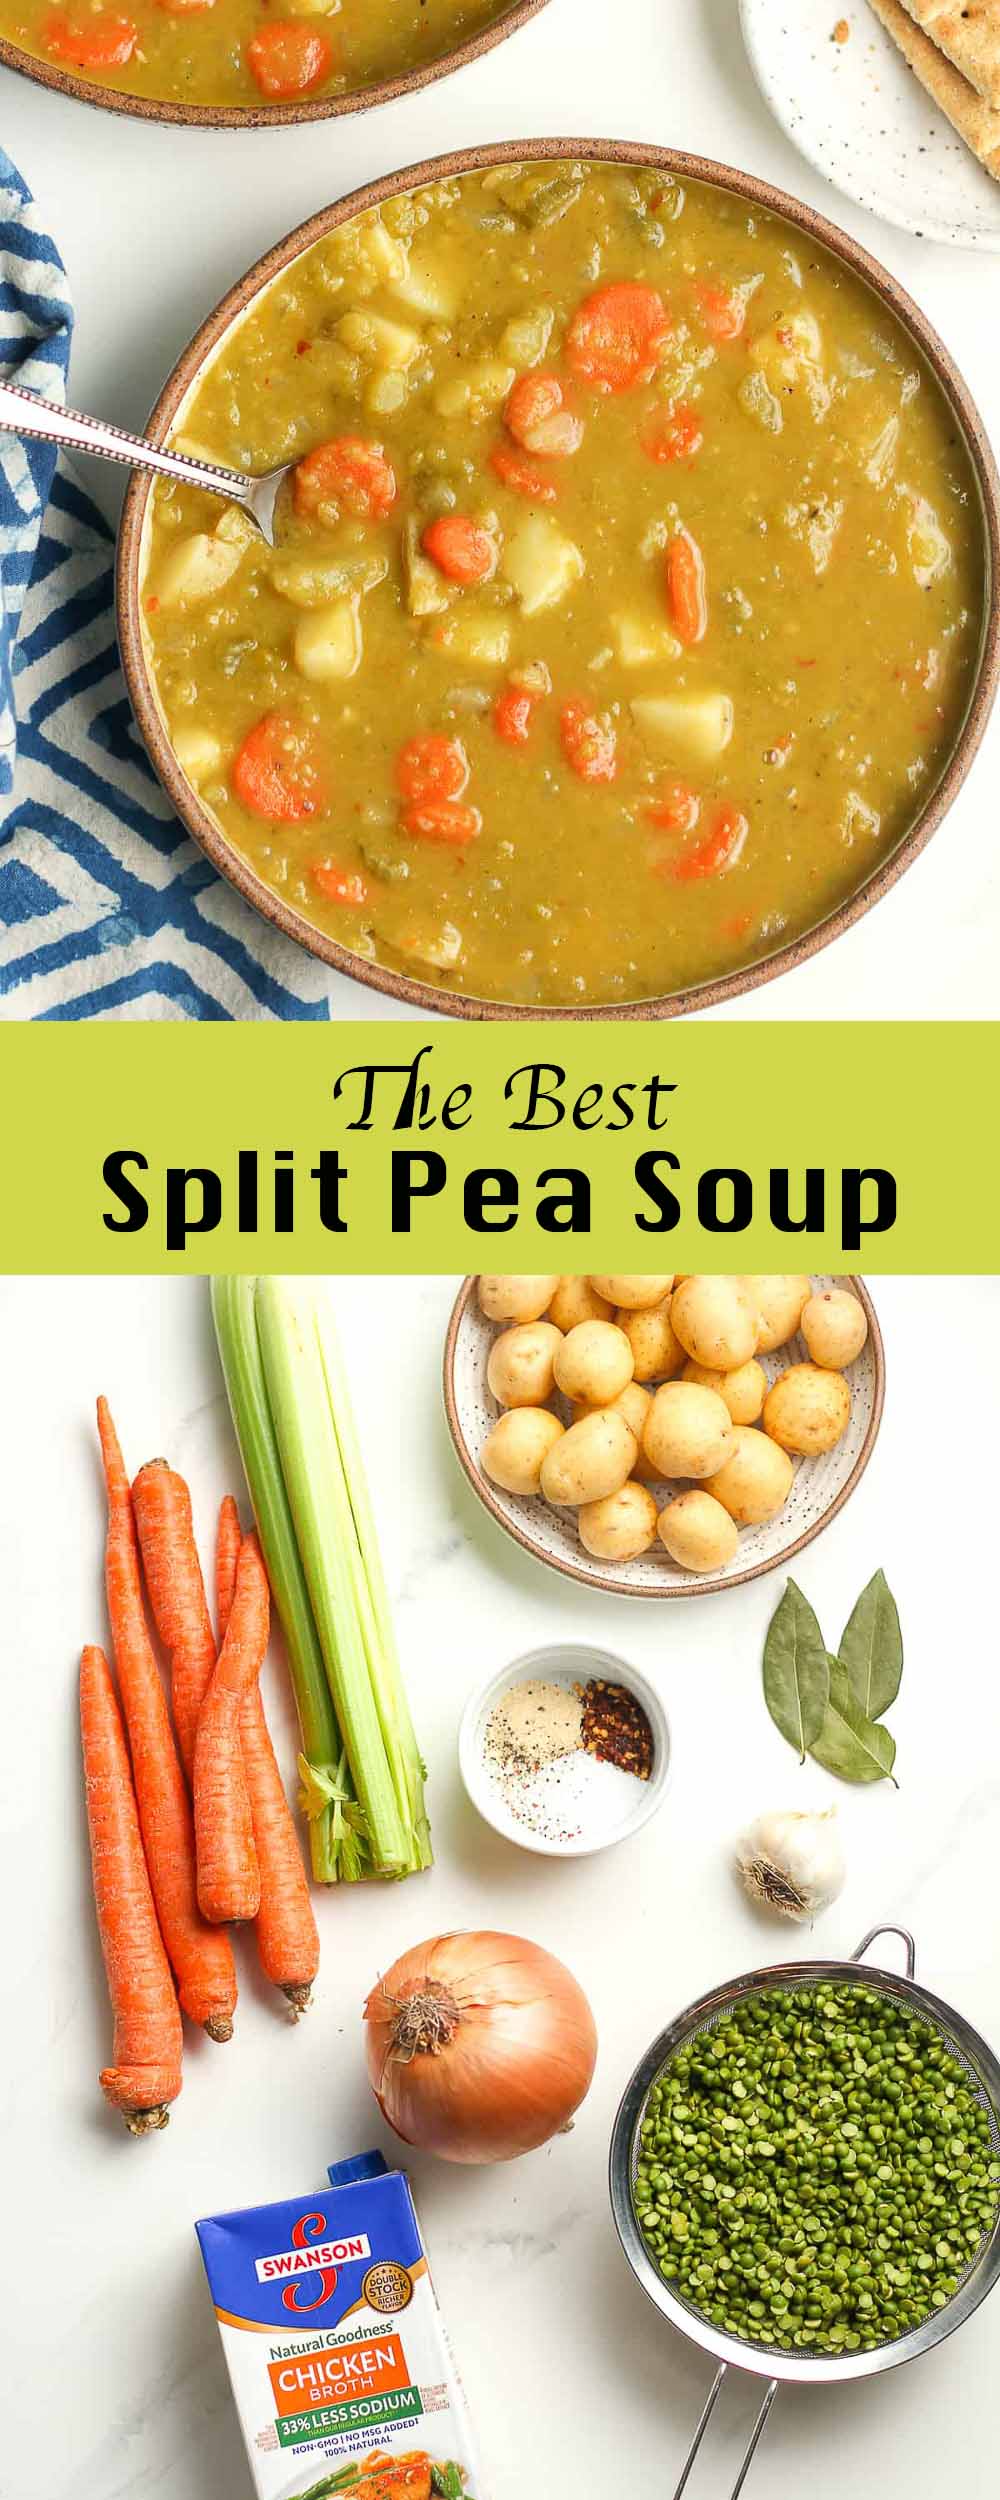 Two photos - a bowl of the best split pea soup and another of the ingredients.